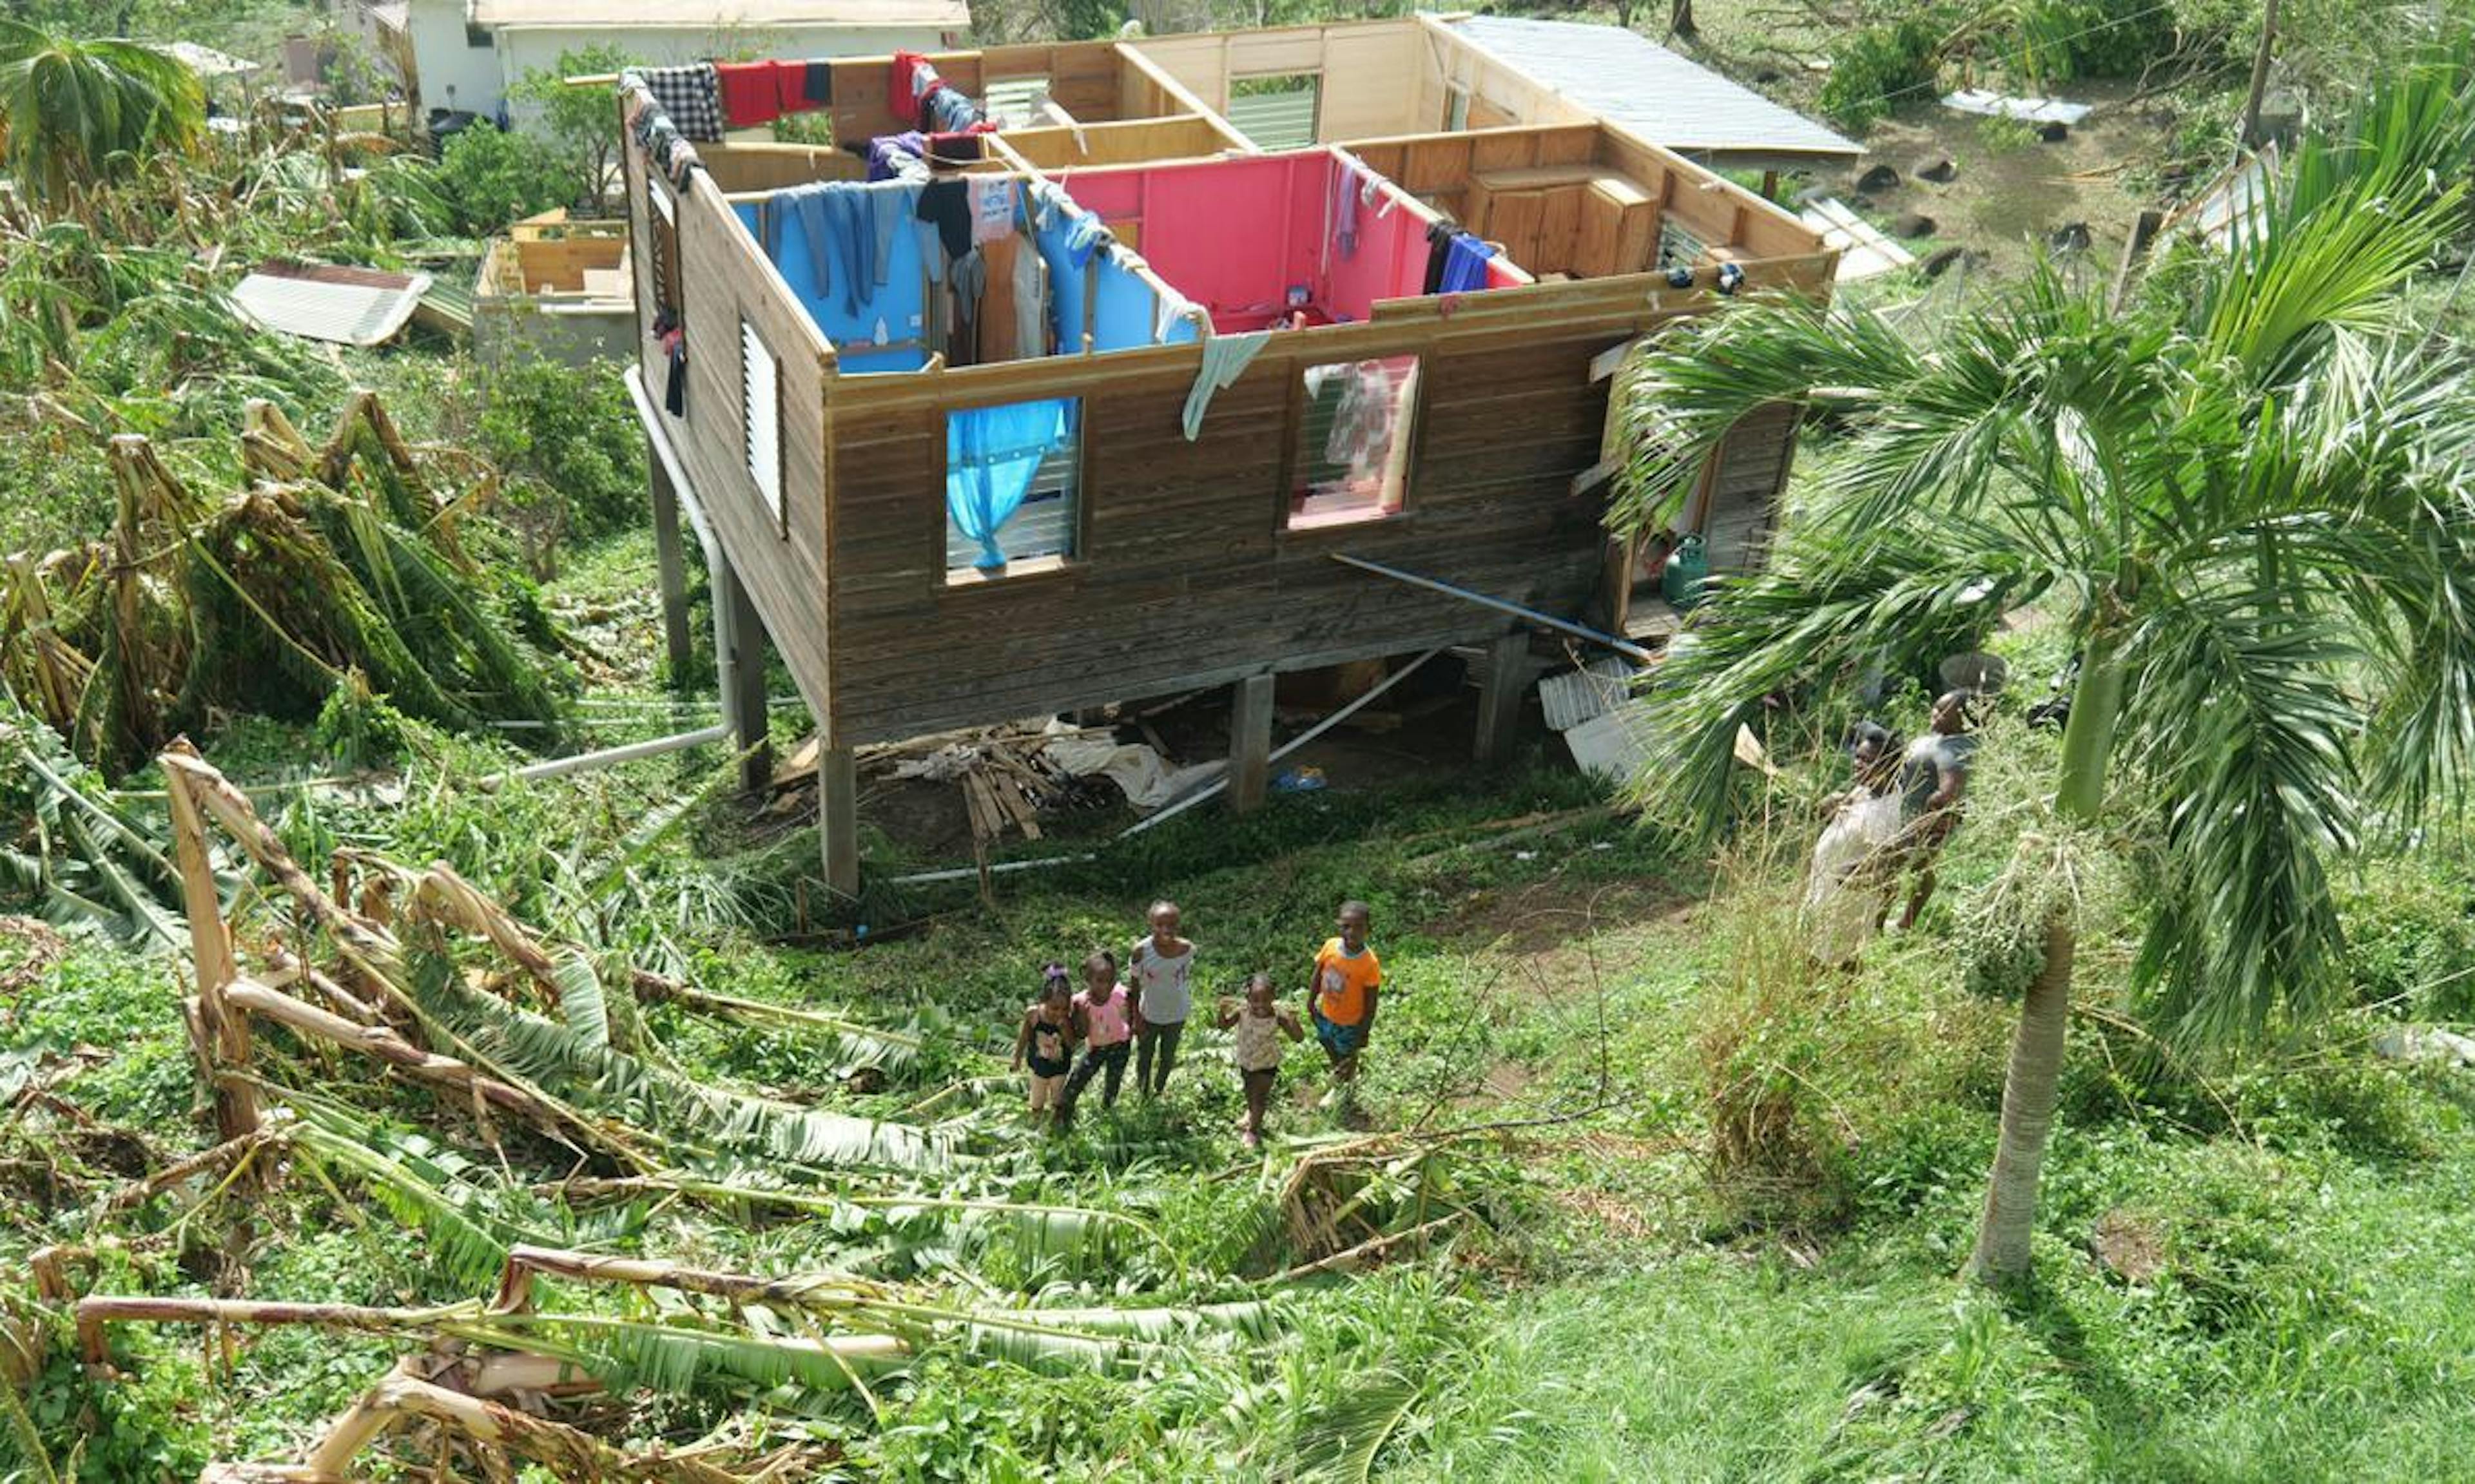 The first major hurricane of the year, Hurricane Beryl, made landfall in the southeast Caribbean on Monday, 1 July, causing widespread damage.